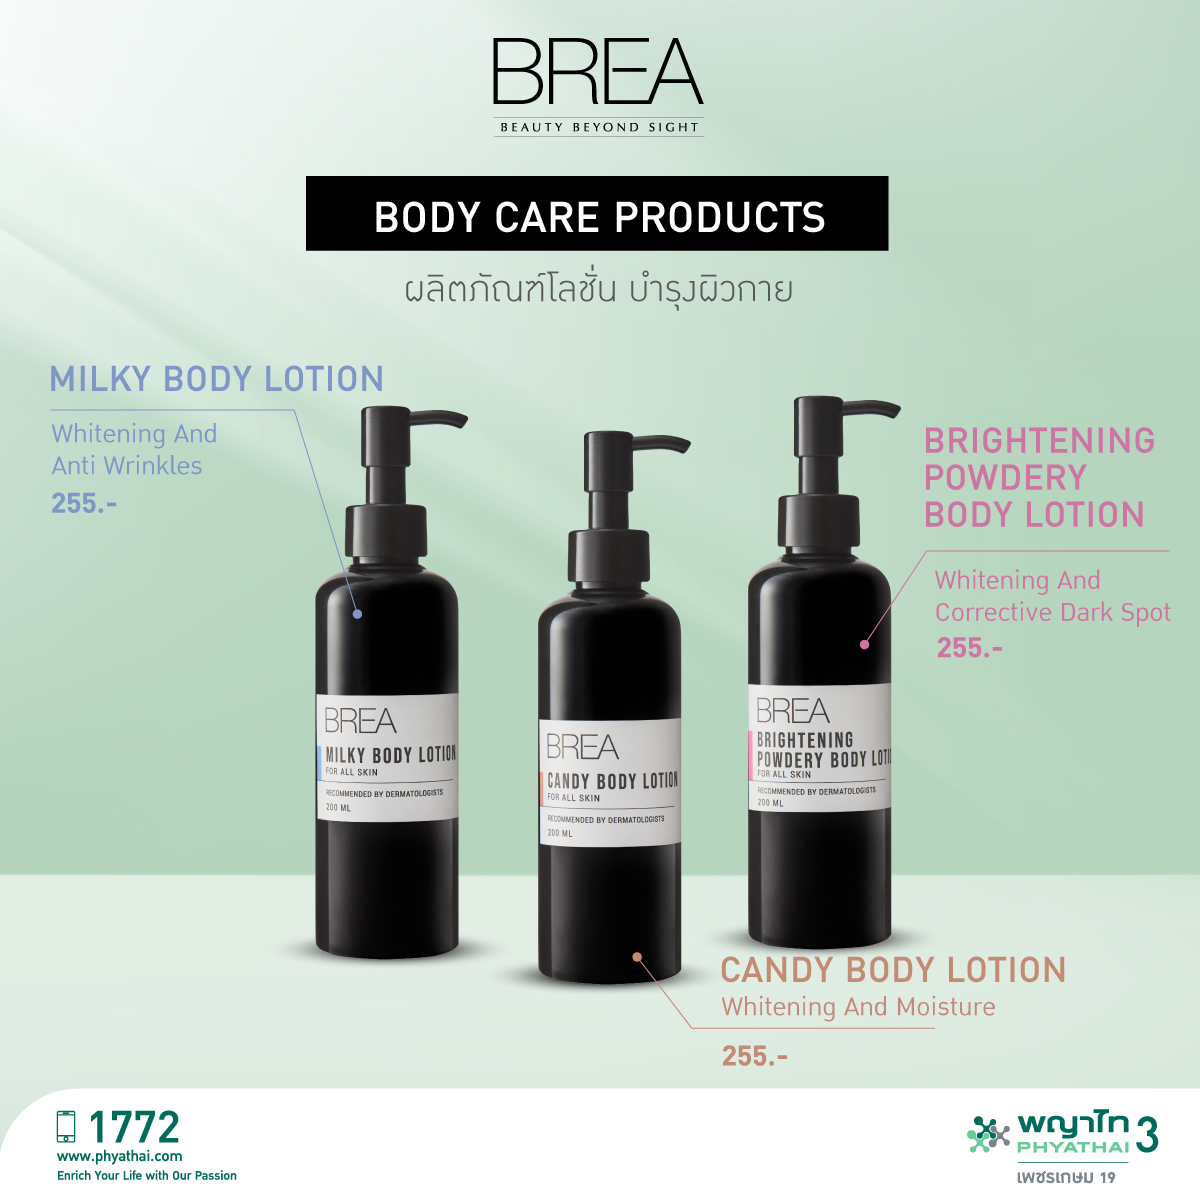 BODY CARE PRODUCTS